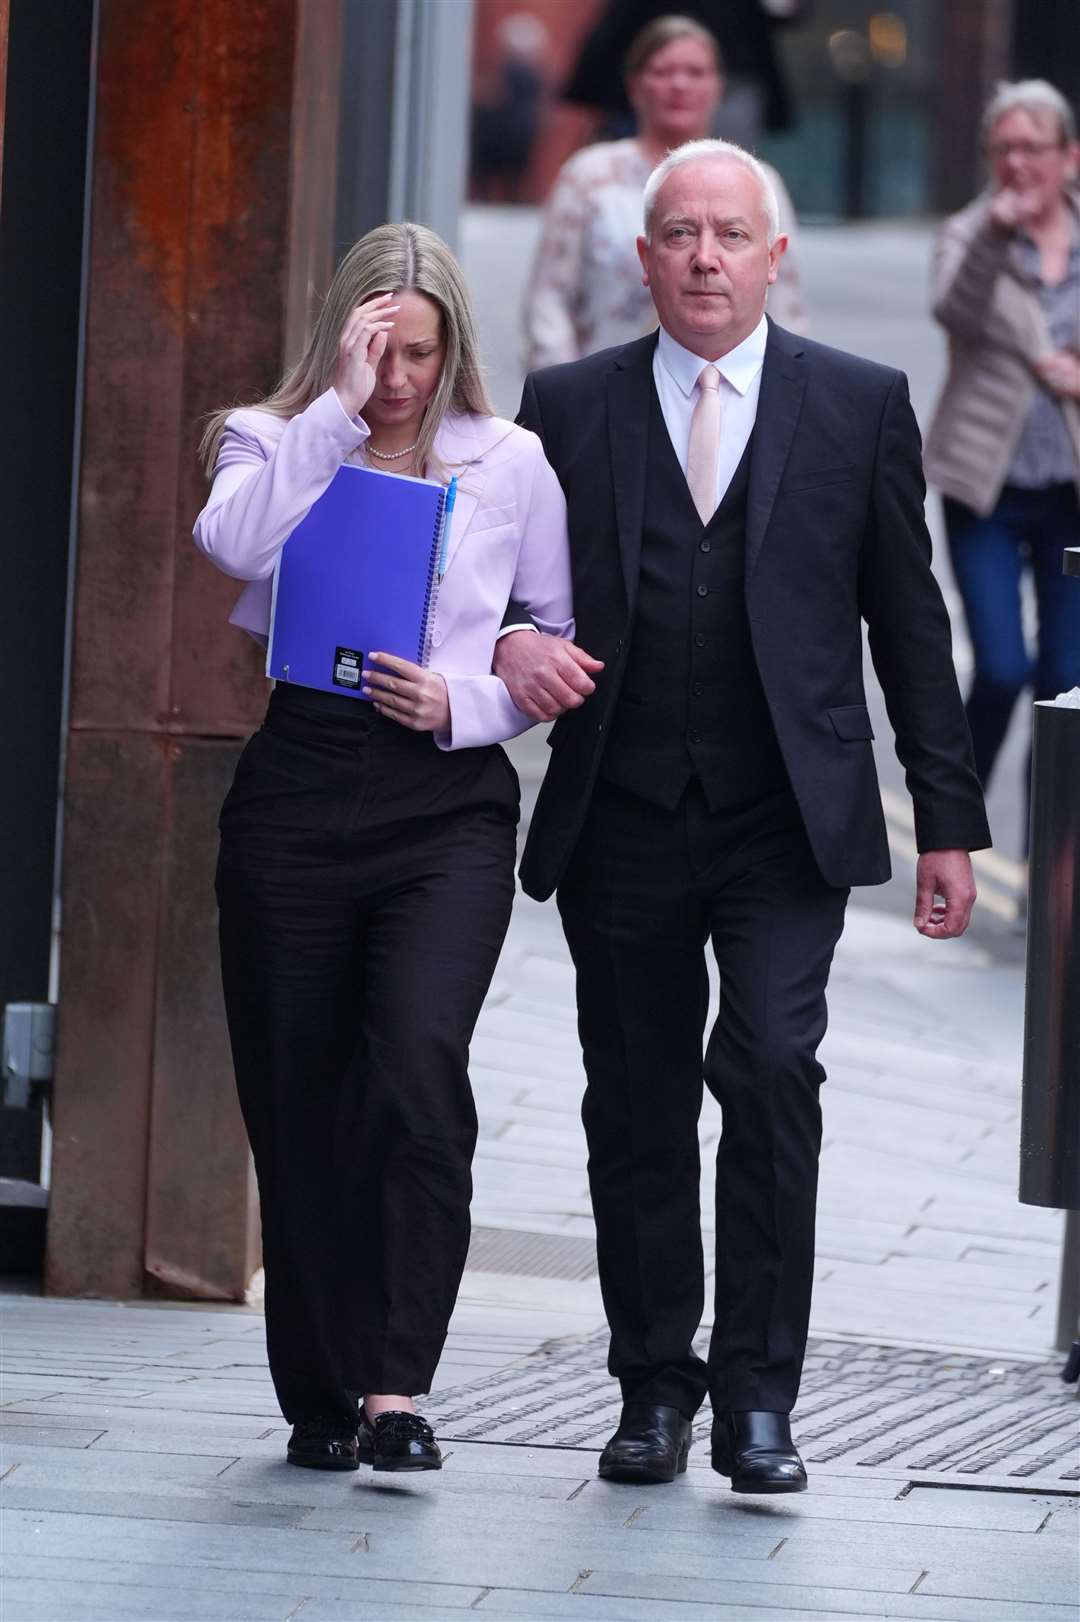 School teacher Rebecca Joynes arrives at Manchester Crown Court, where she is charged with six counts of sexual activity with two teenagers, including two counts of sexual activity while being a teacher in a position of trust (Peter Byrne/PA)